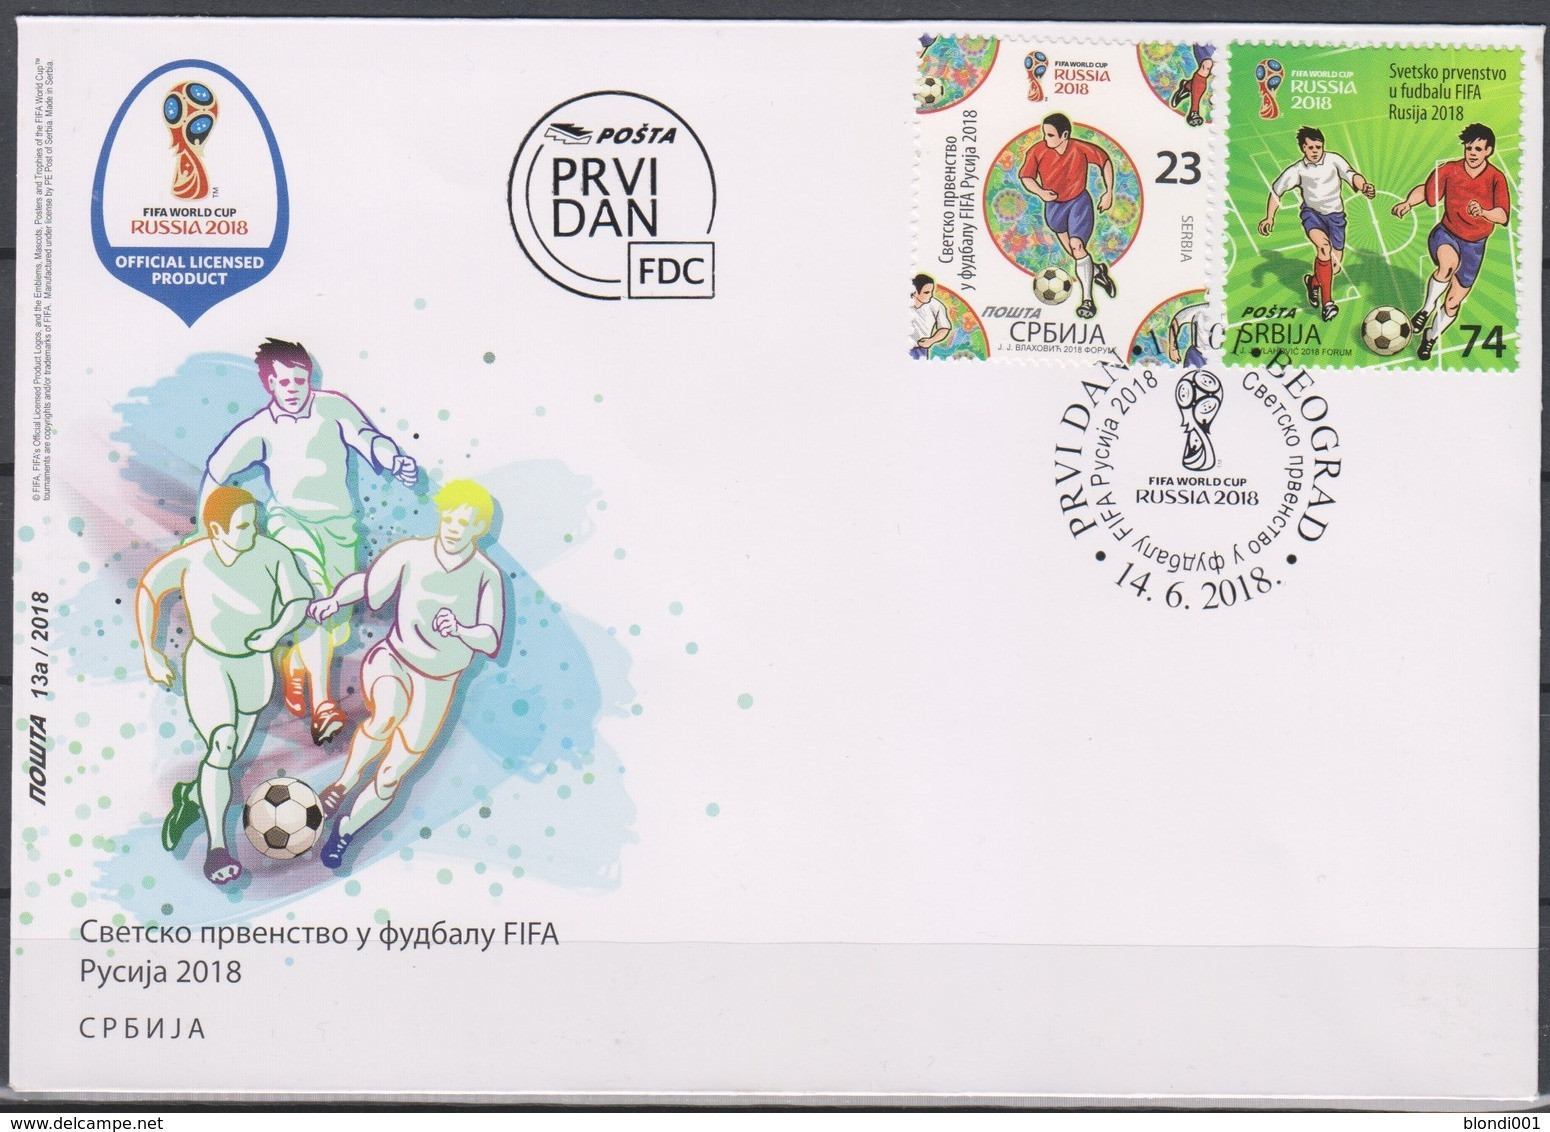 Soccer World Cup 2018 - SERBIJA - FDC Cover - 2018 – Russia